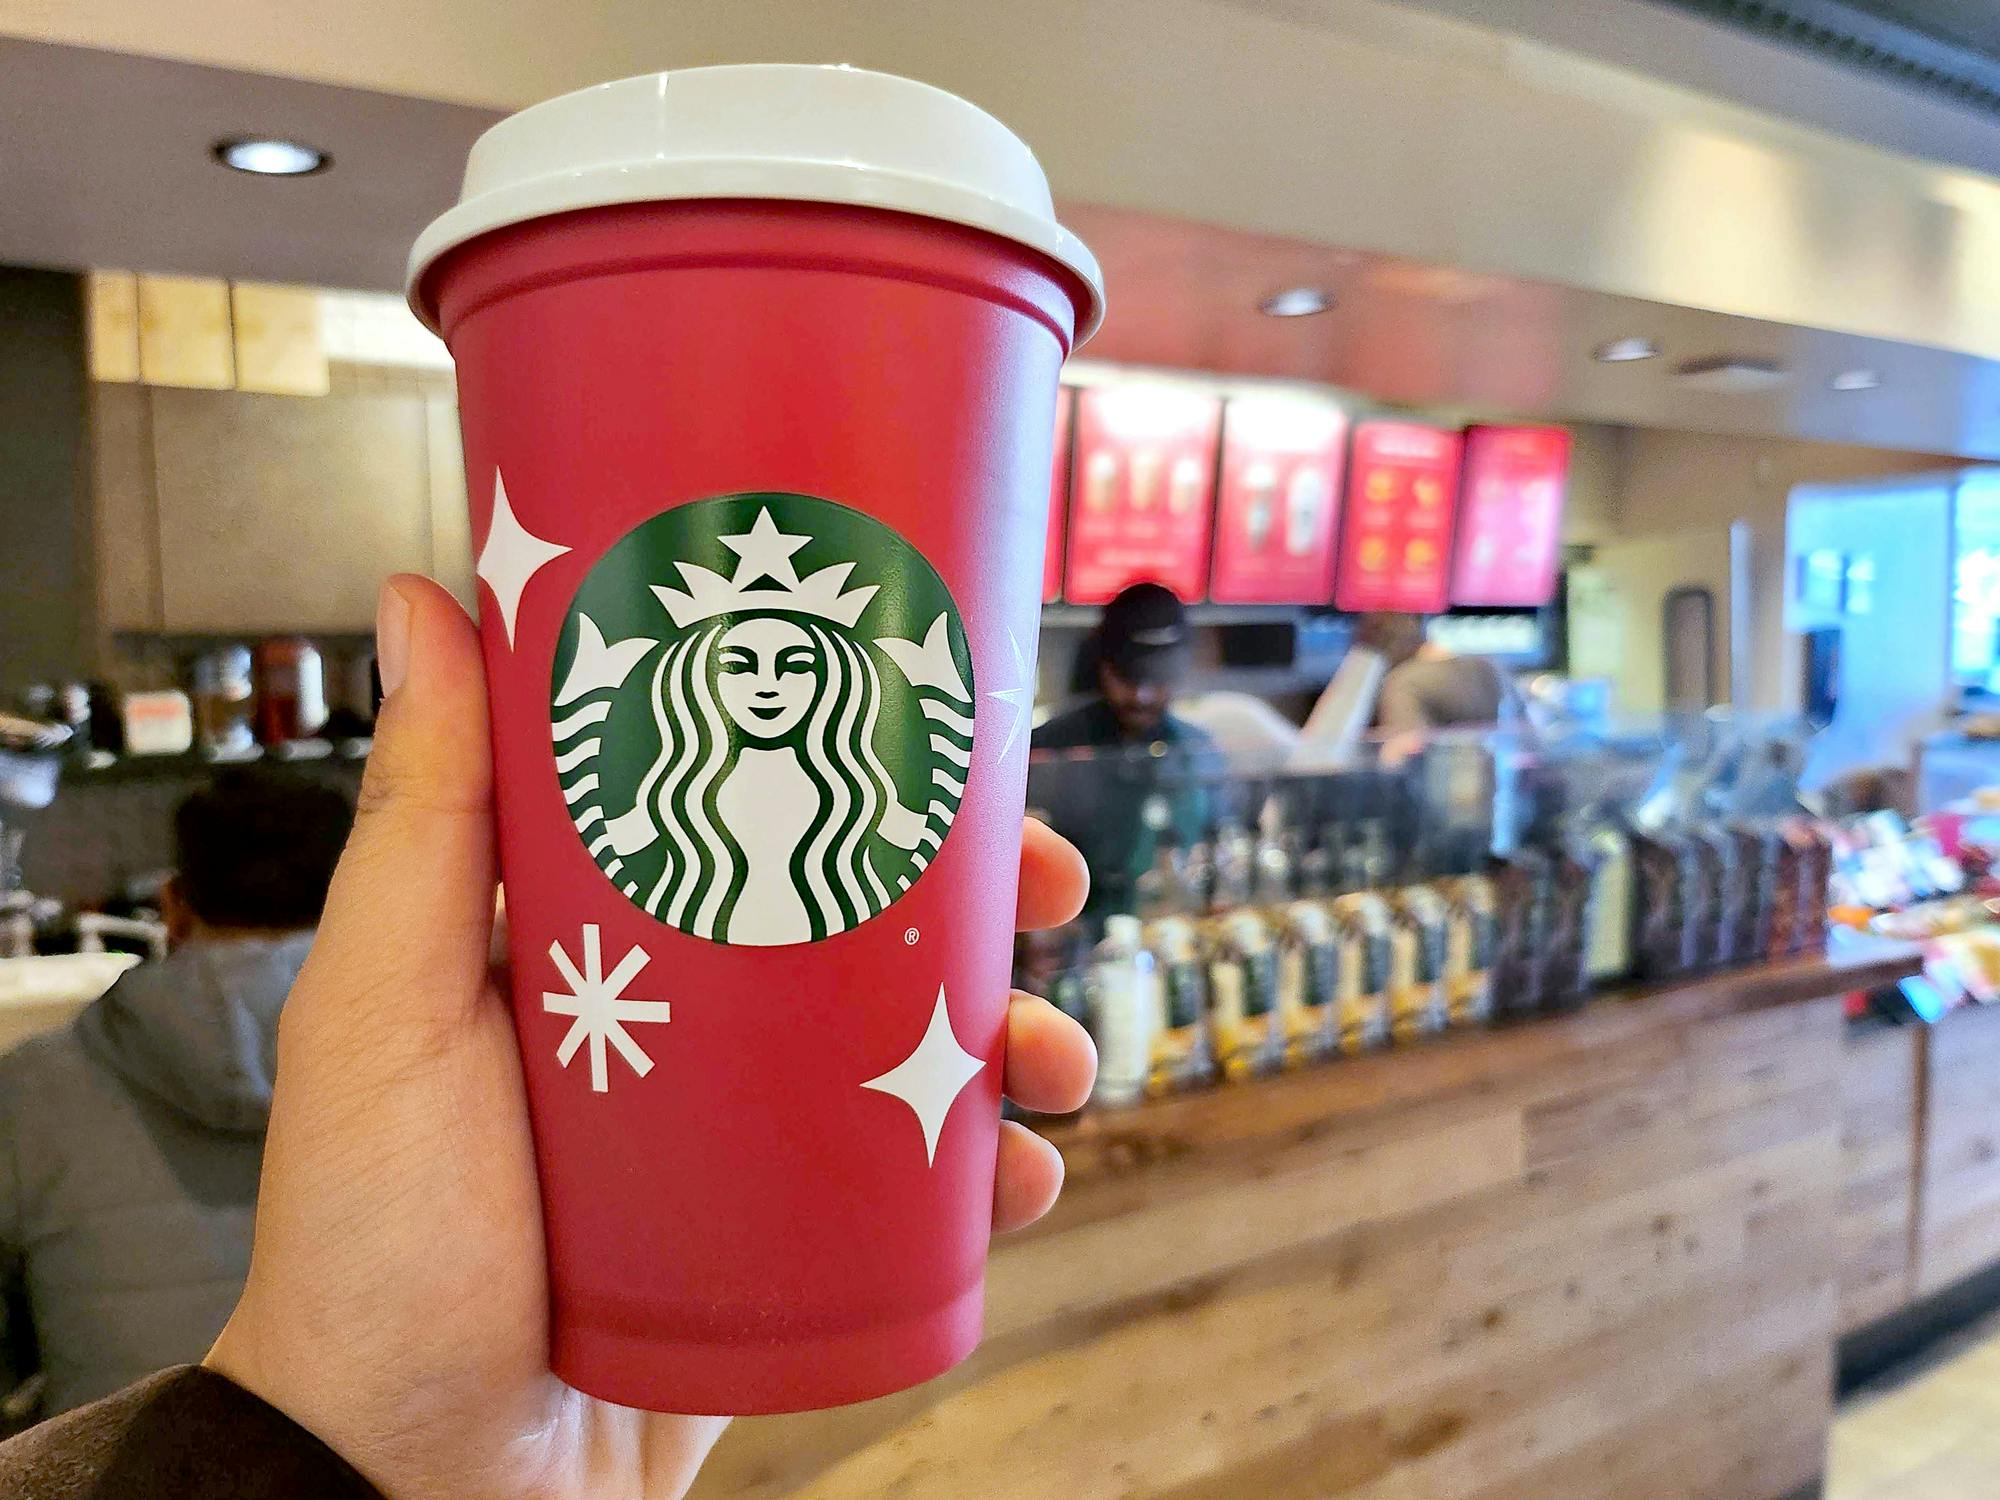 Starbucks Red Cup Day: How to Get the Free Cup - Krazy Coupon Lady